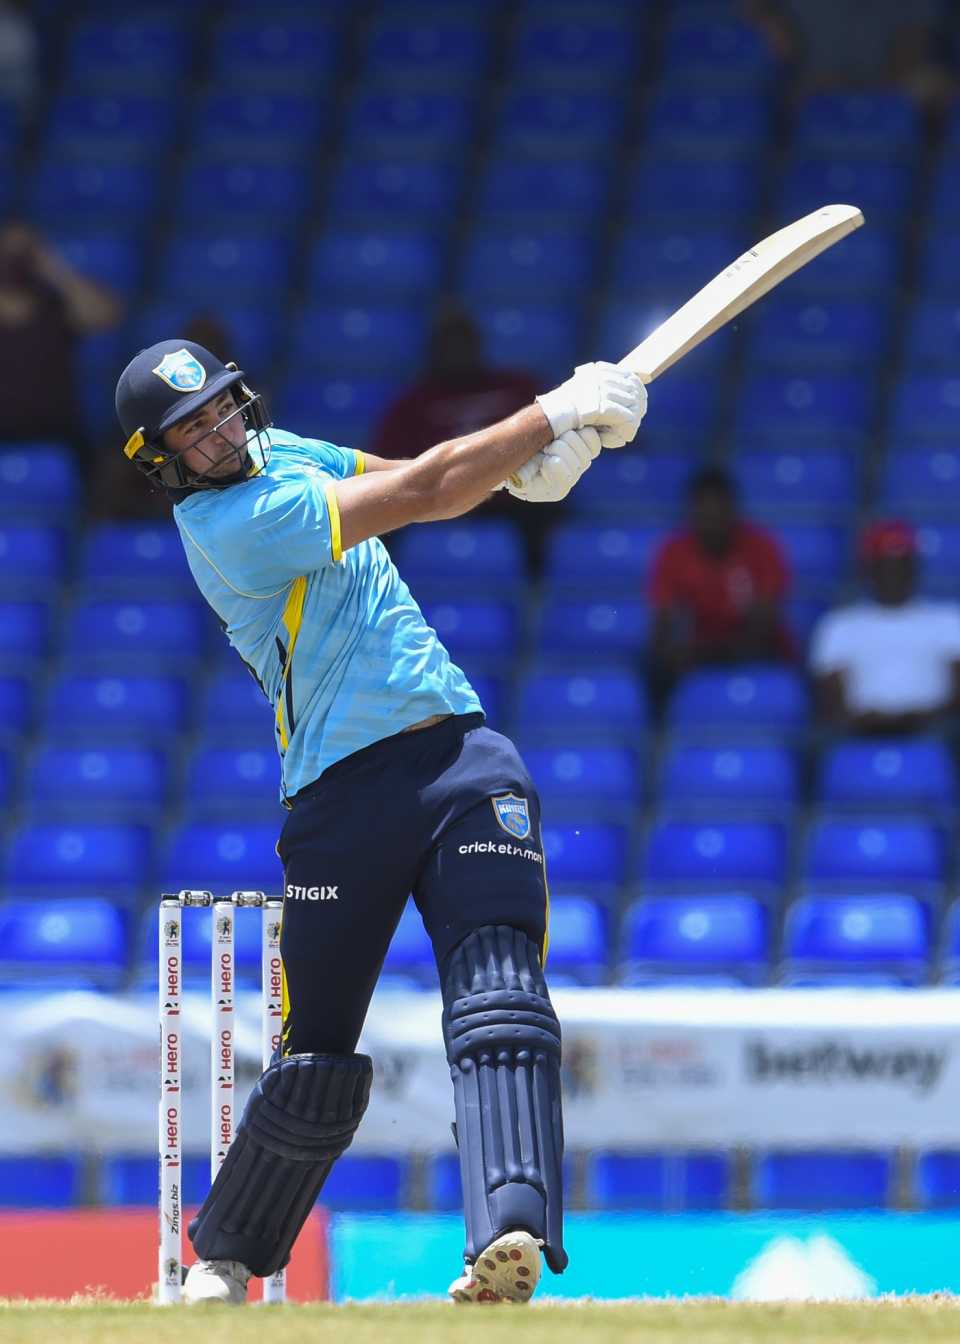 Tim David launches one for six, St Lucia Kings vs Trinbago Knight Riders, CPL 2021, Basseterre, August 29, 2021
